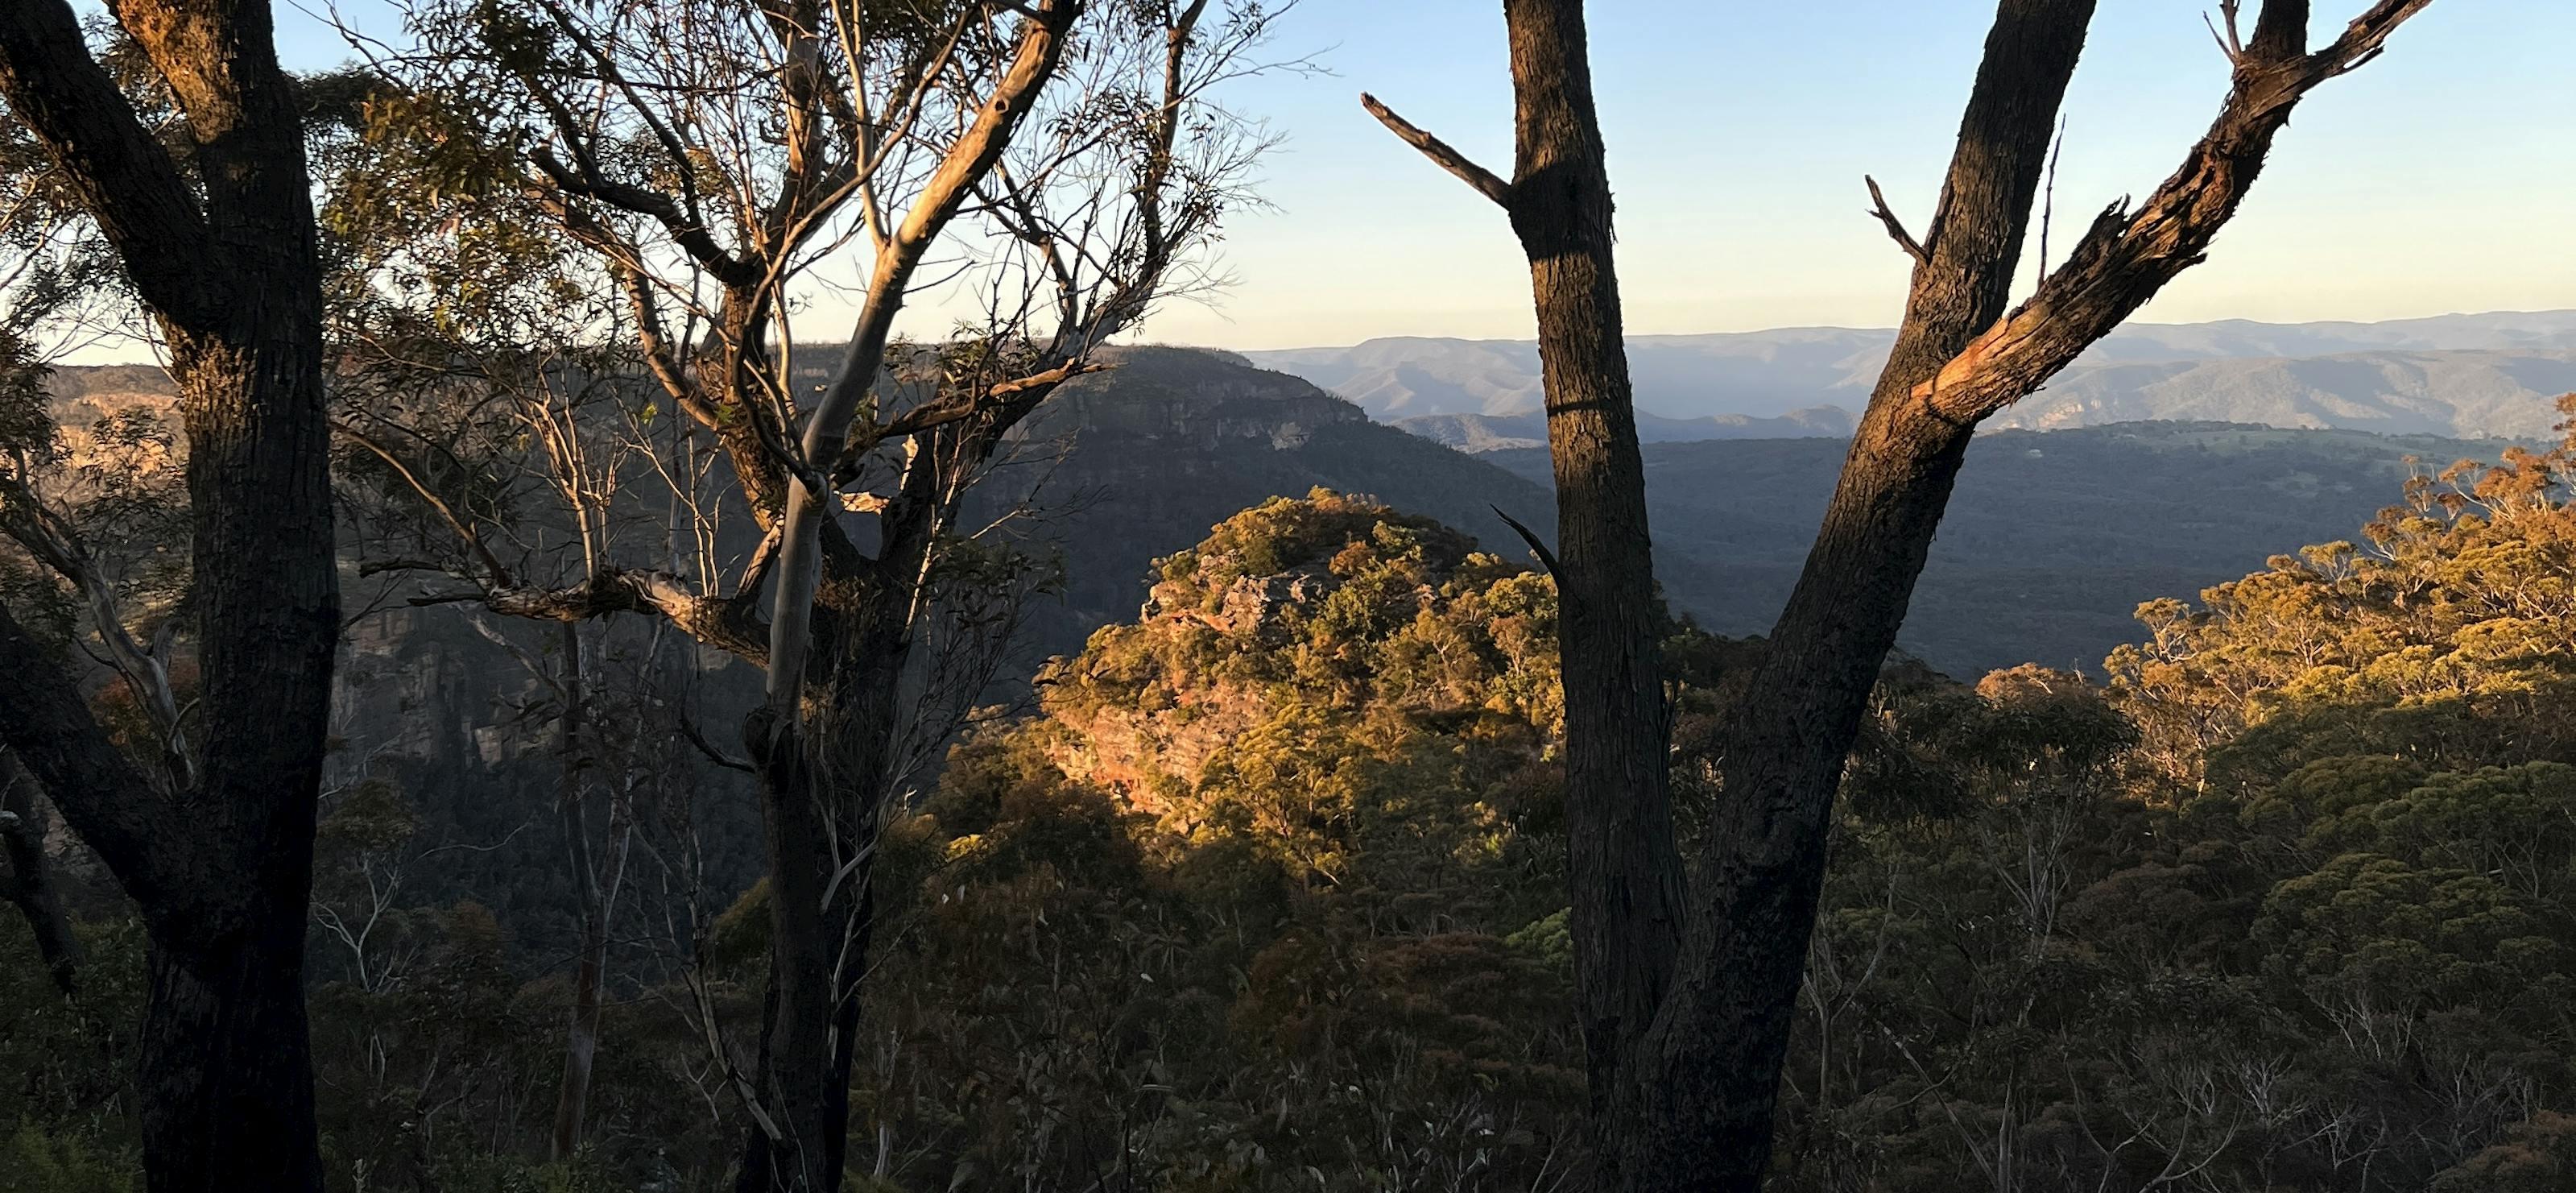 Looking out into the Blue Mountains between trees